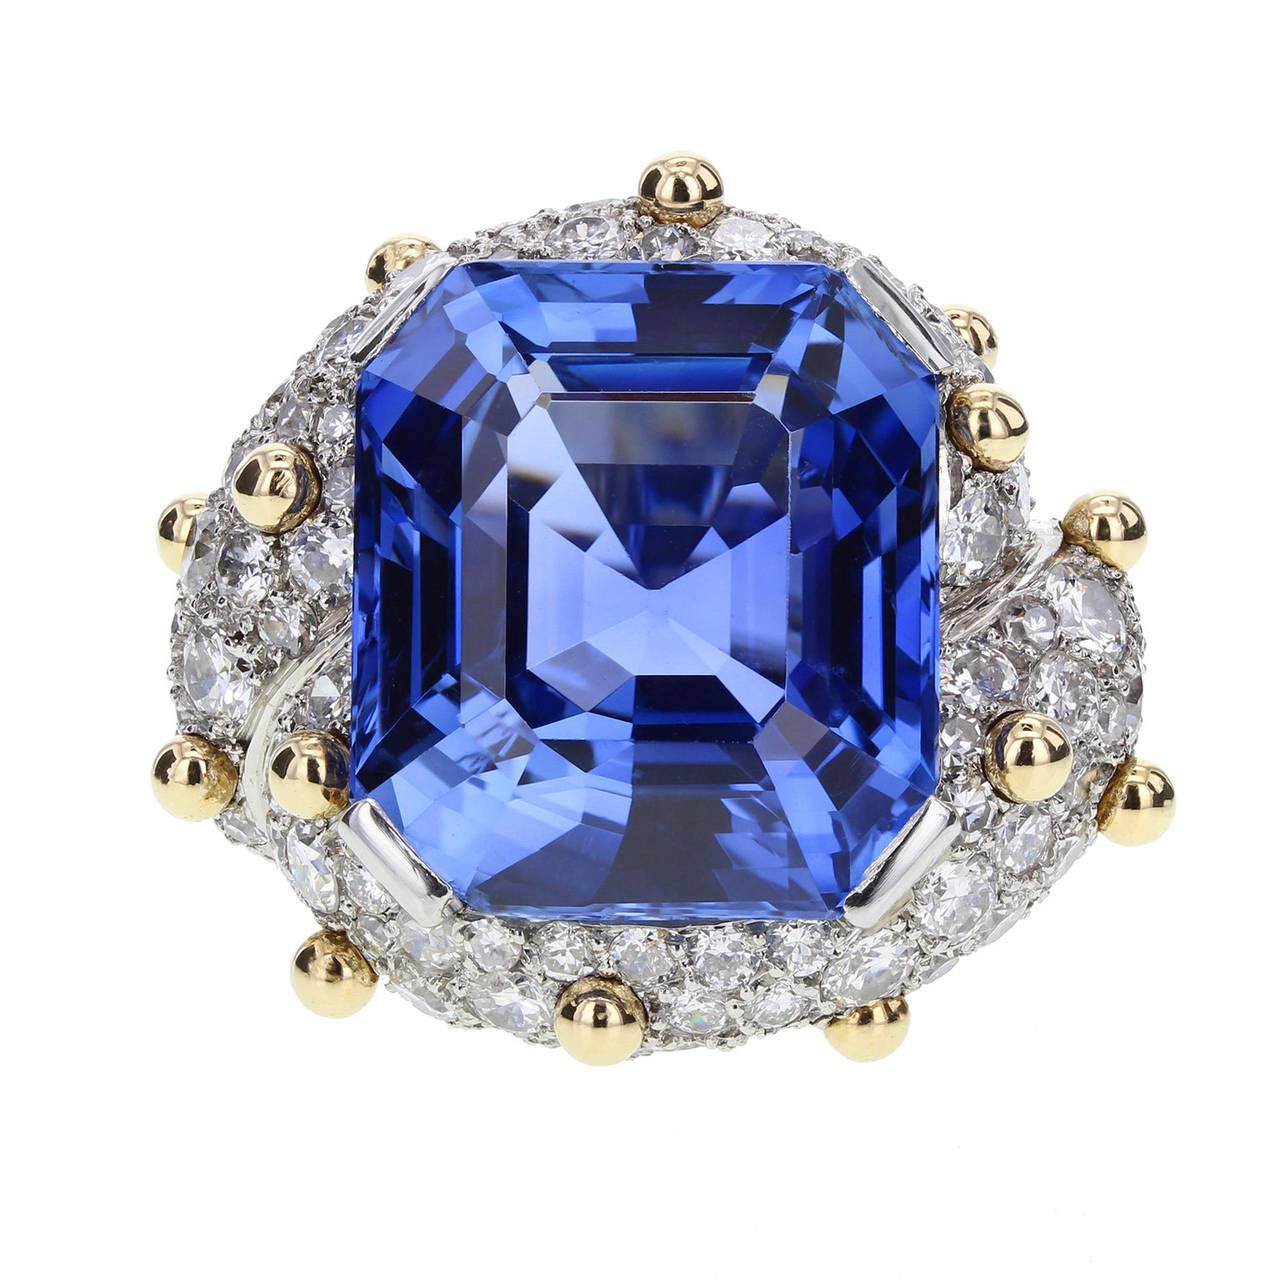 Central cut cornered step-cut gem quality sapphire weighing 30 carats, claw set within a pave set brilliant-cut diamond mount with beaded accents, above pave set brilliant-cut diamond shoulders, approximately 5 carats in total. Signed Schlumberger